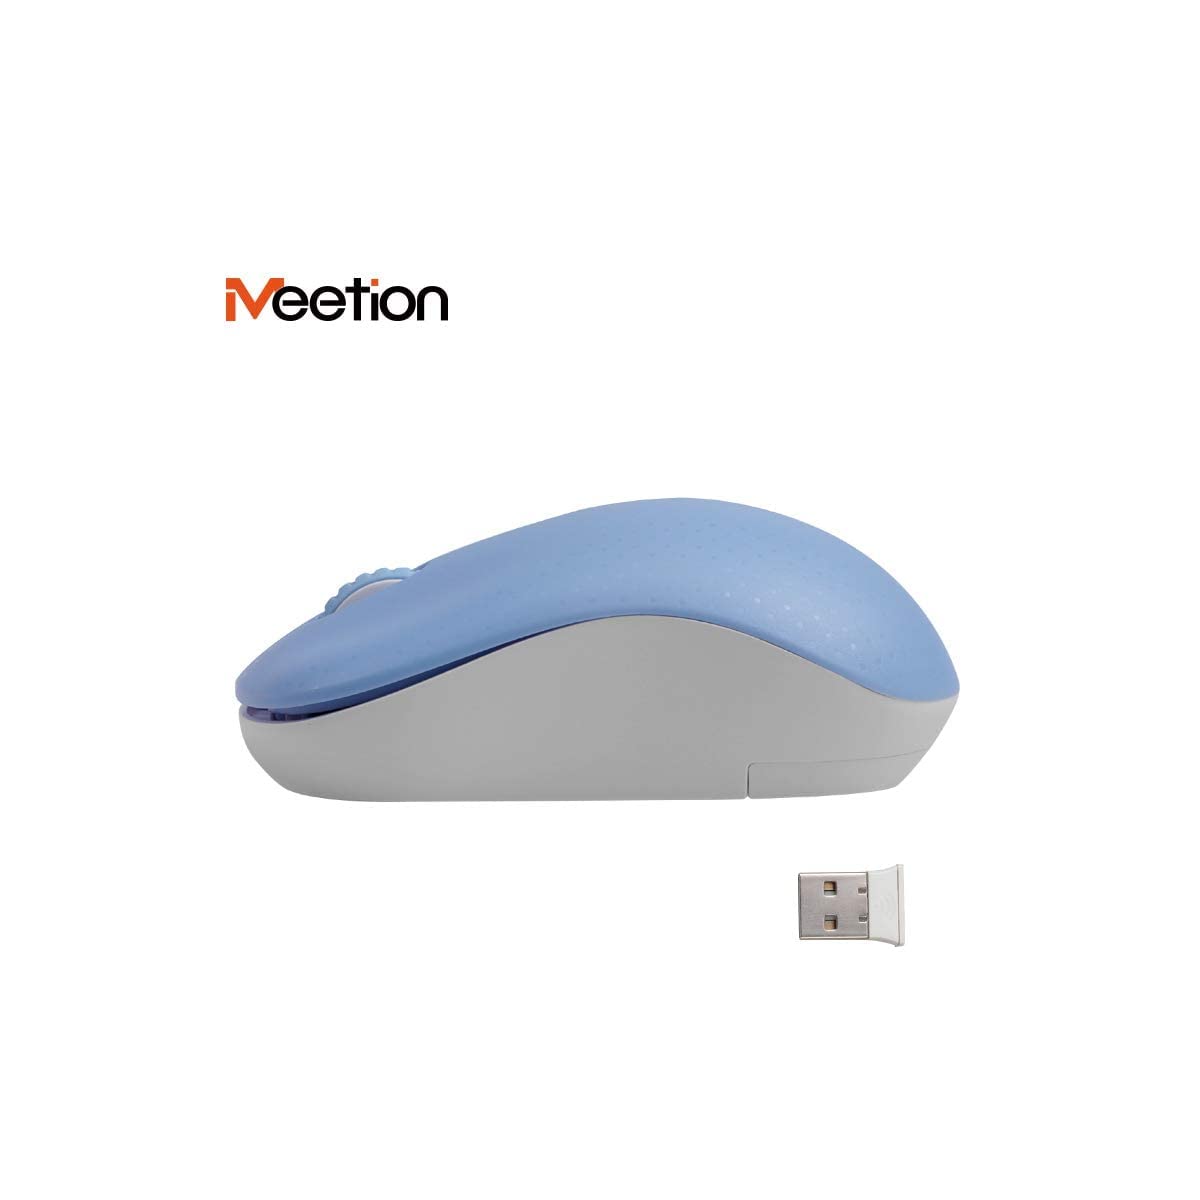 MeeTion Cordless Optical Usb Computer 2.4GHz Wireless Mouse - Blue